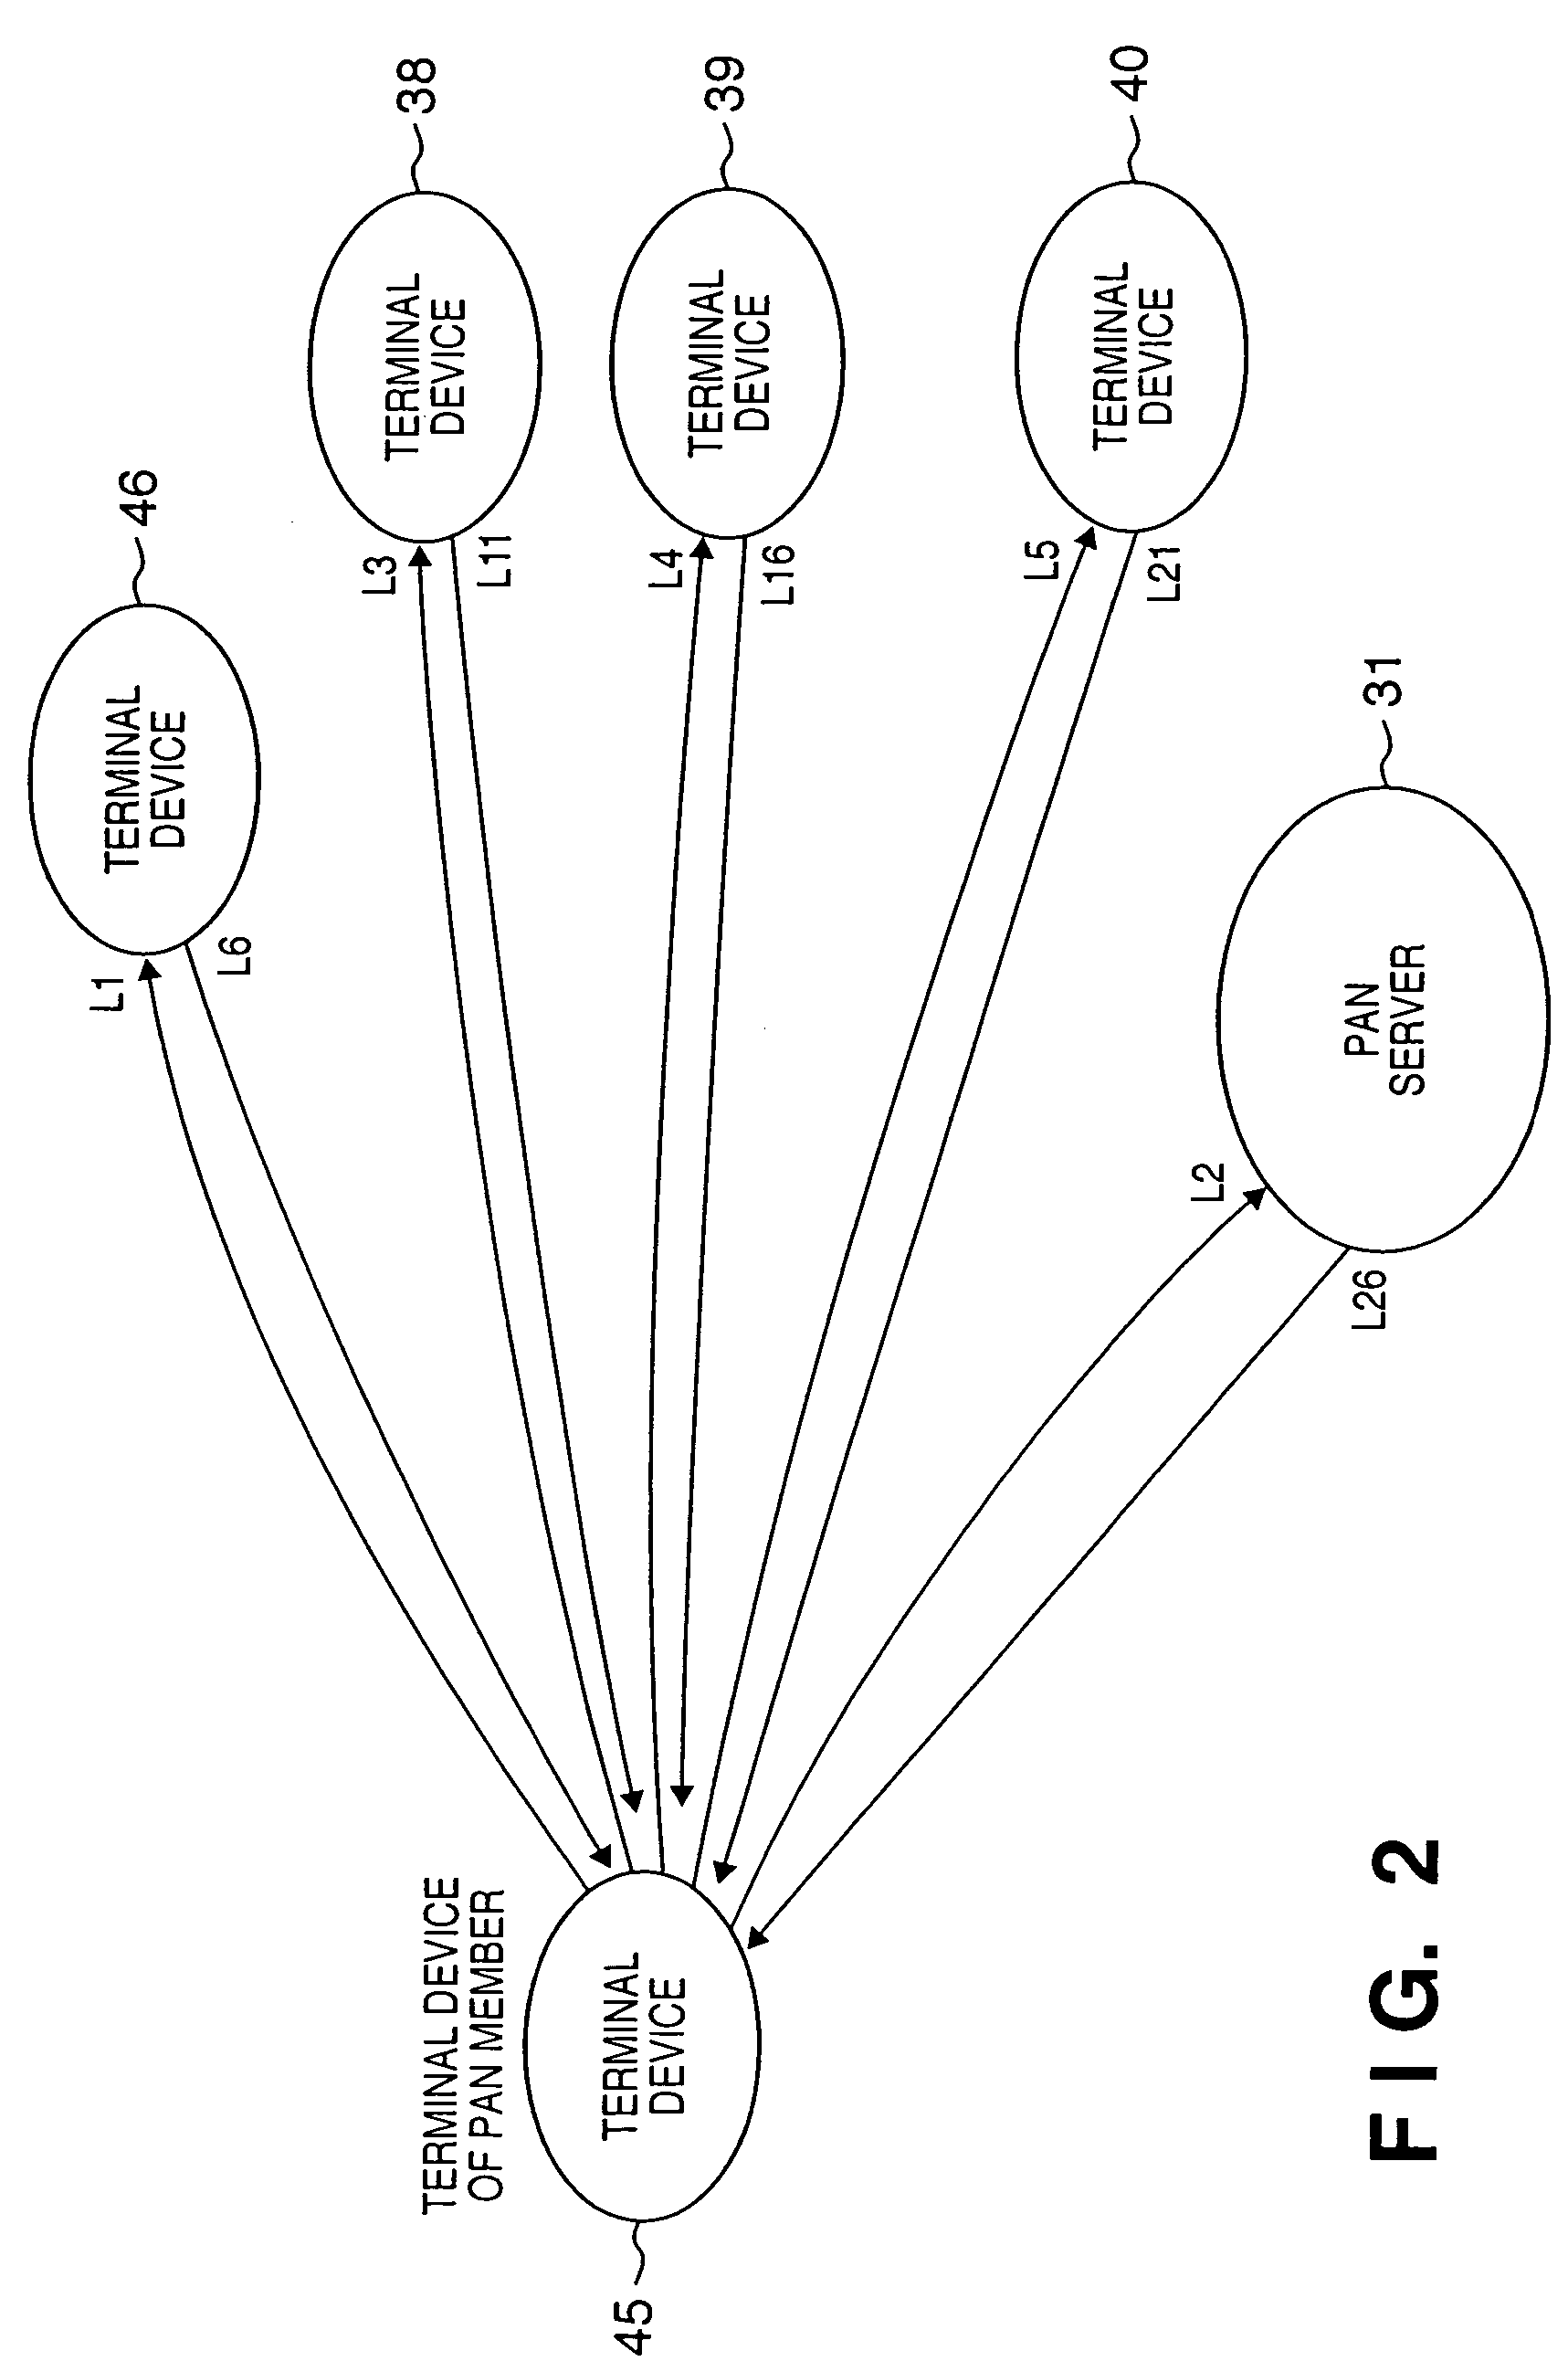 Network switching apparatus, route management server, network interface apparatus, control method therefor, computer program for route management server, and computer-readable storage medium